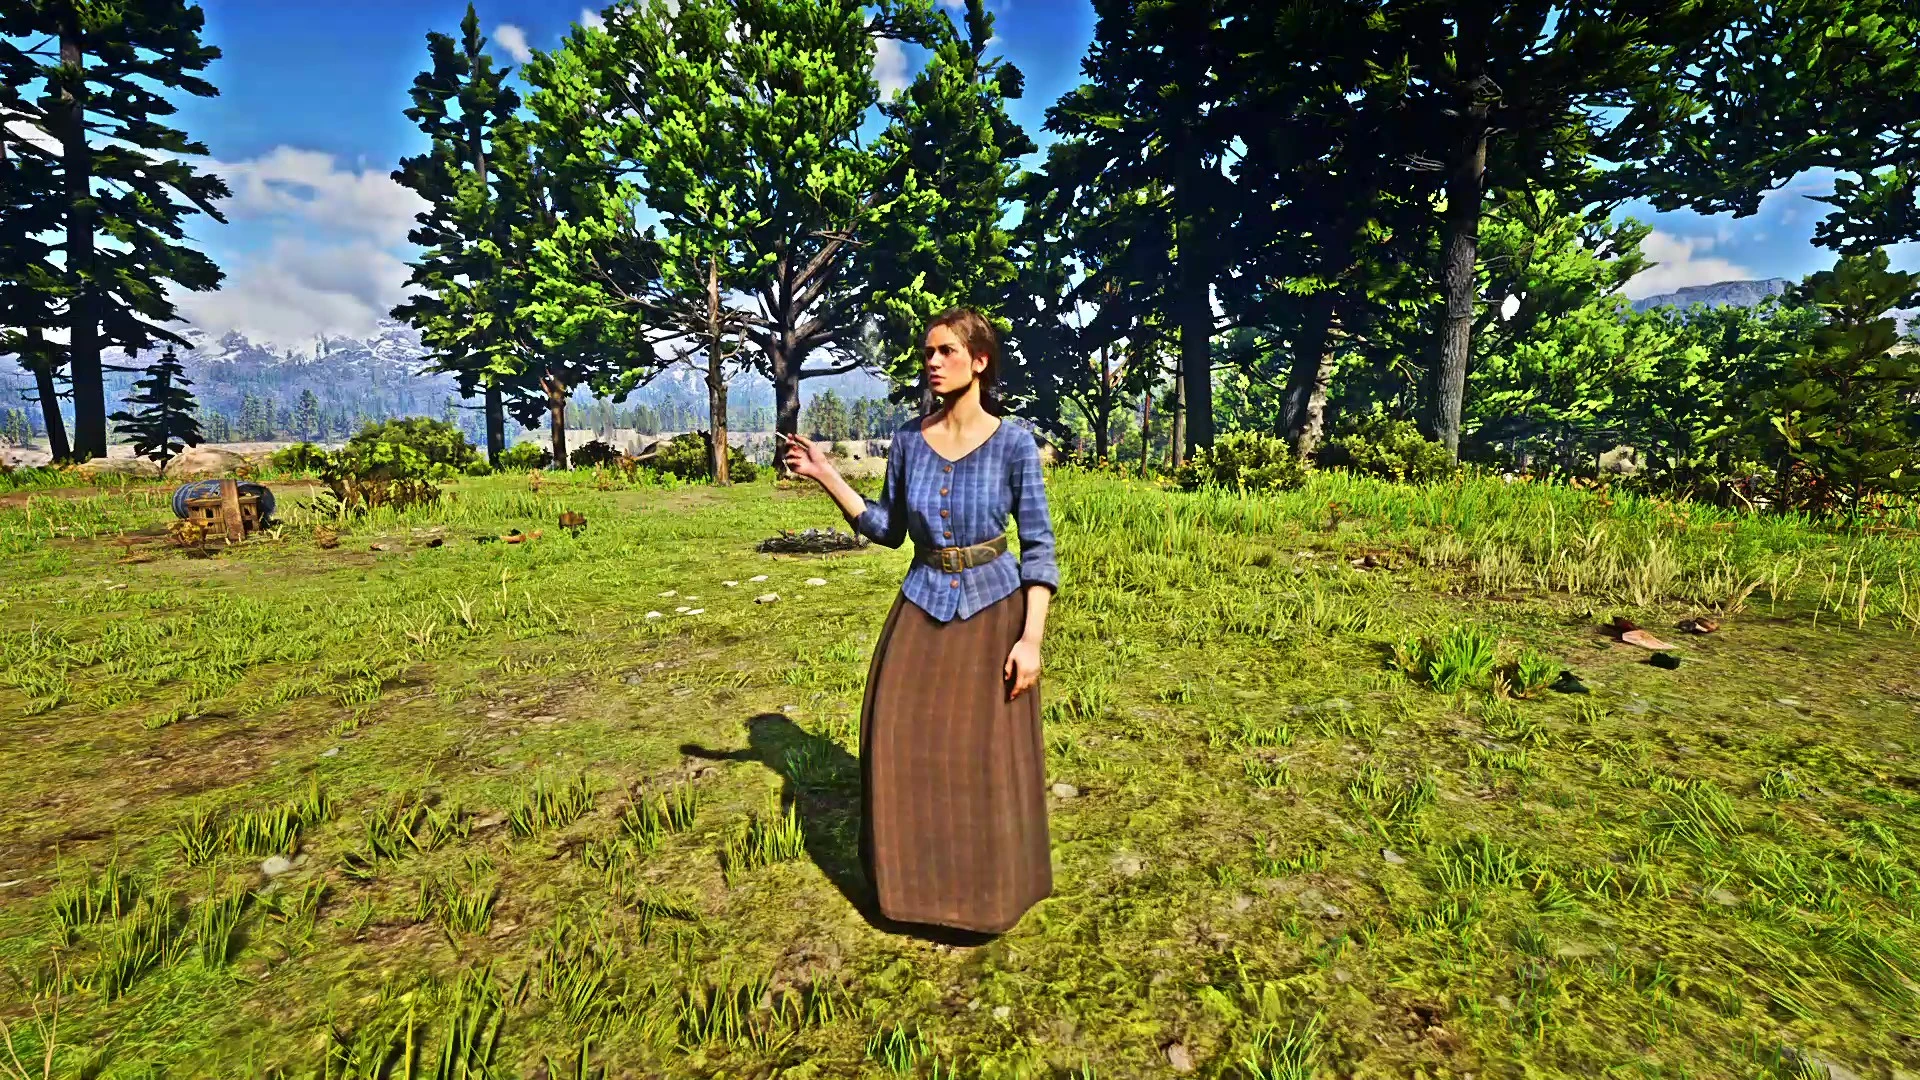 Mary Linton at Red Dead Redemption 2 Nexus - Mods and community